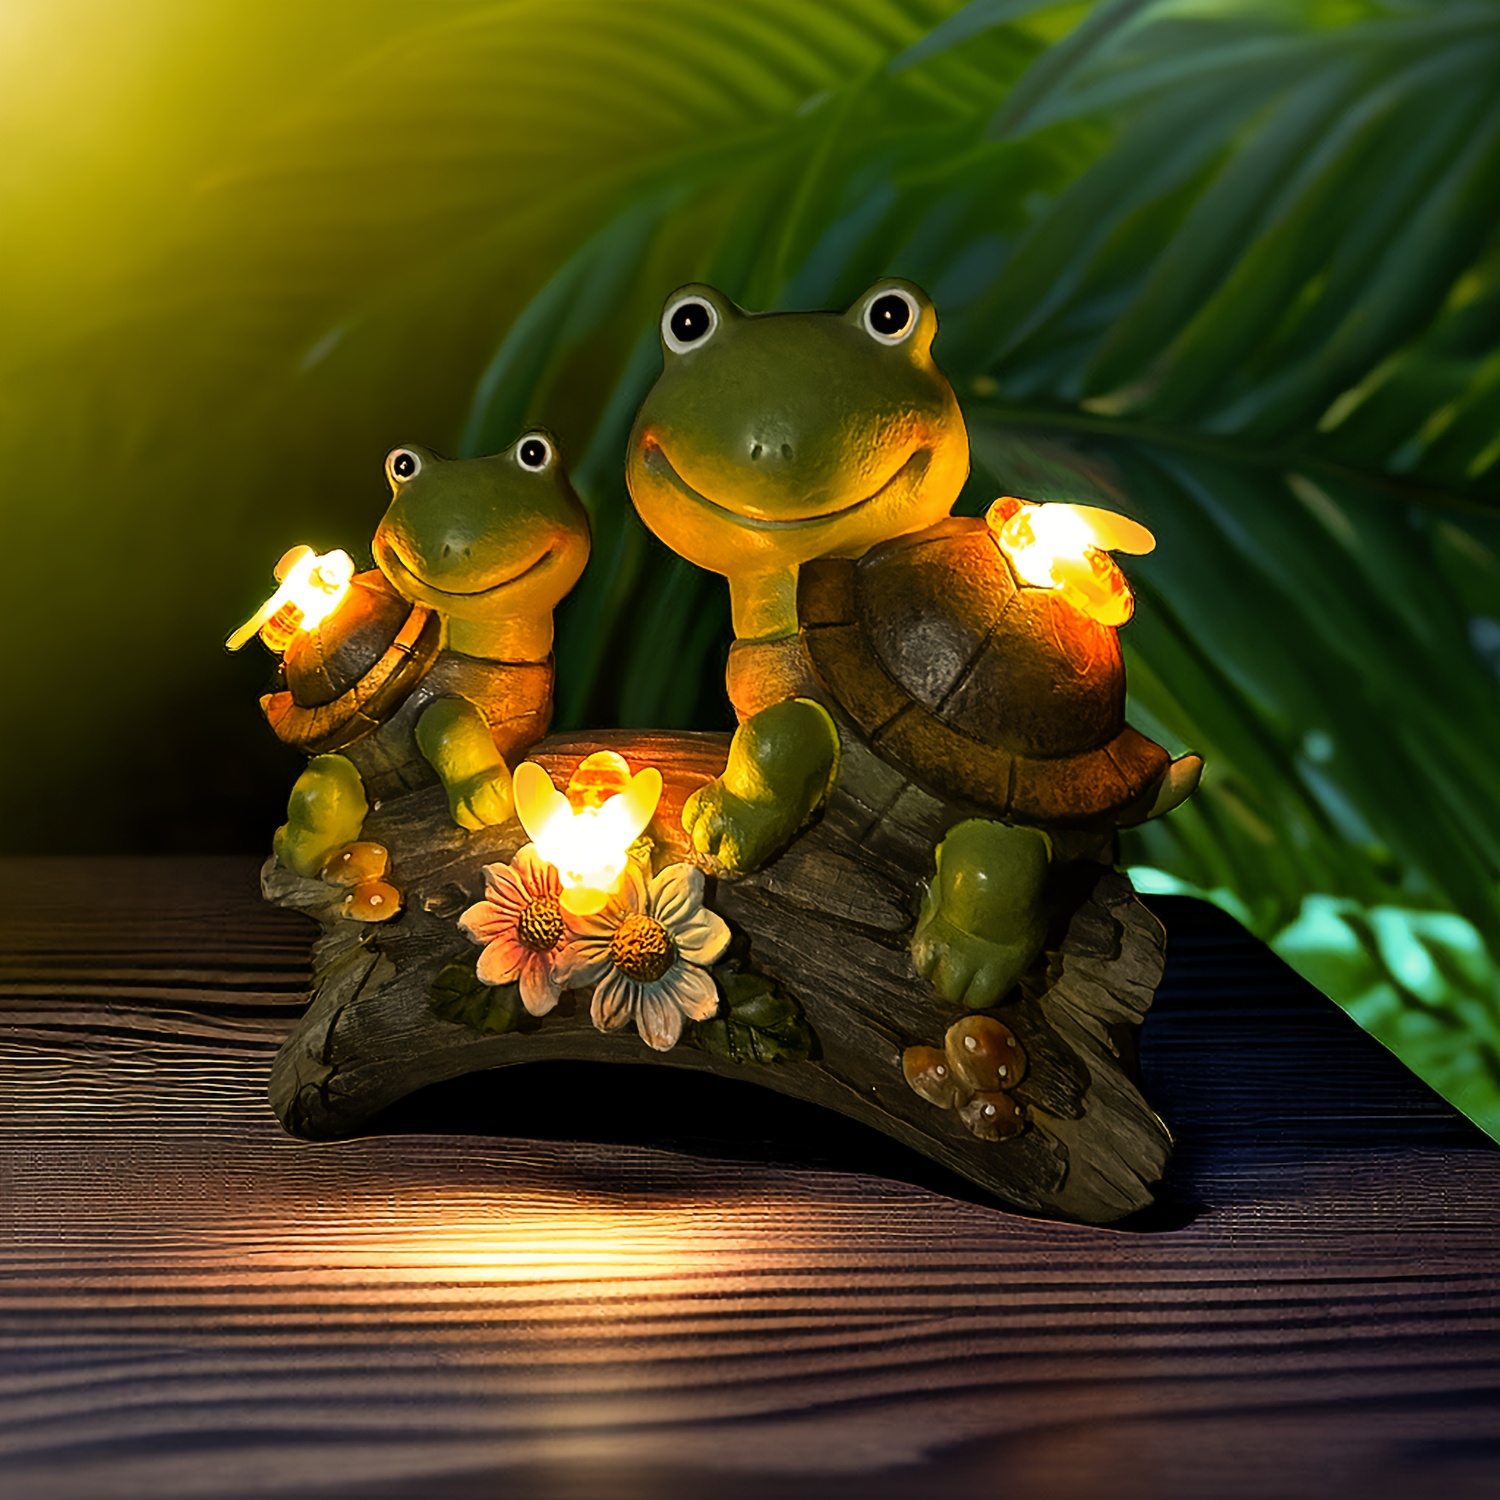 Fun Frog Statue Iron Art Ornament For Indoor/Frog Garden Statue Decor,  Lawn, Home Desk Decoration, Animal Gift 230818 From Lang10, $8.44